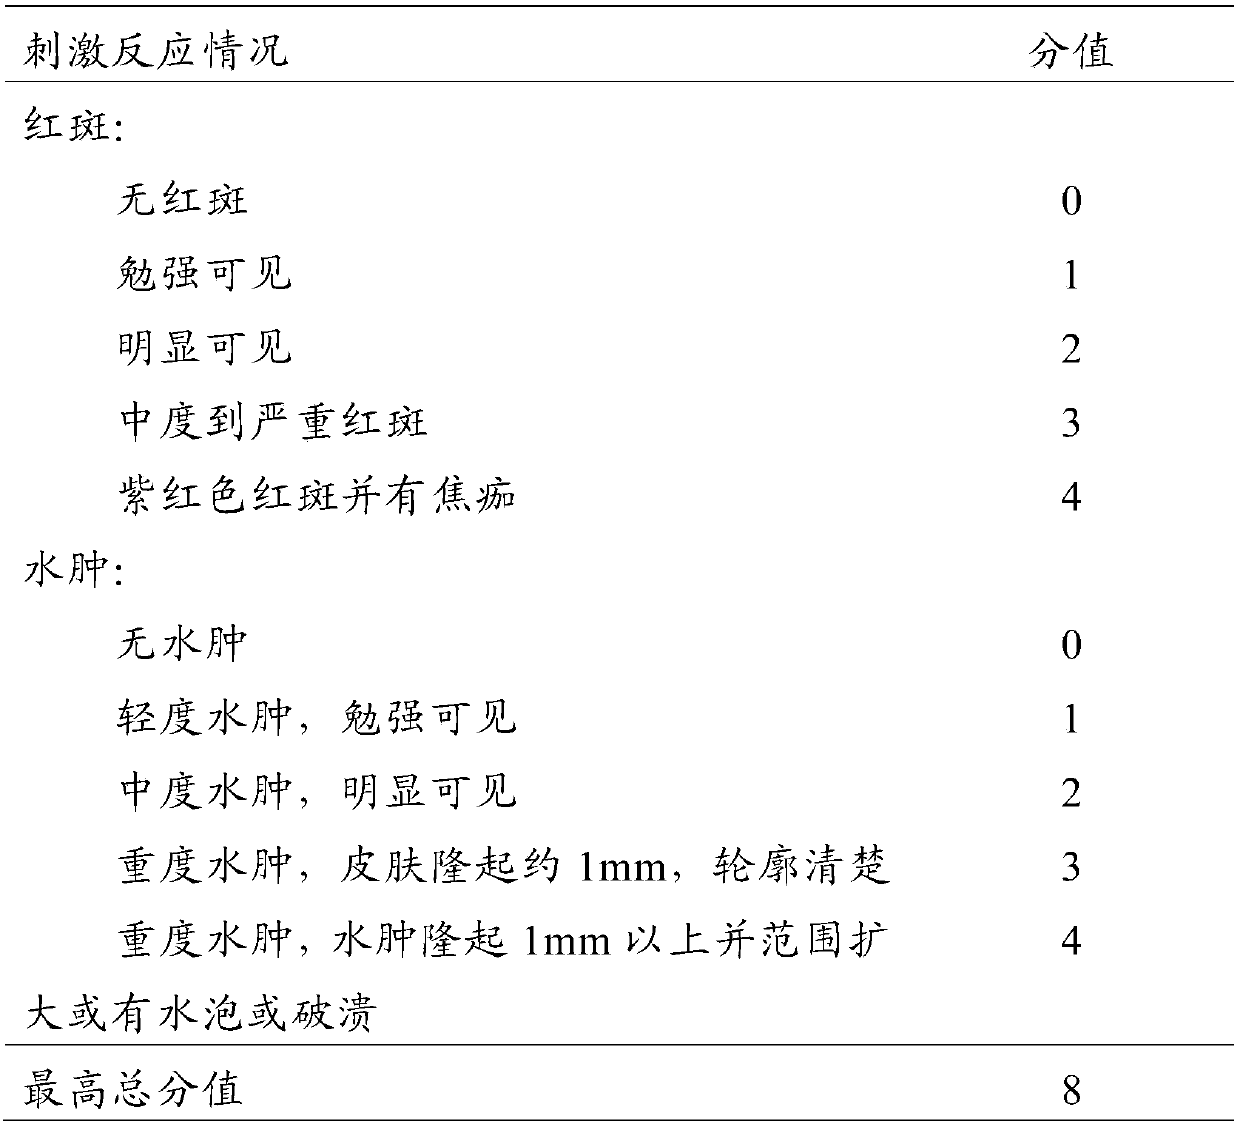 Traditional Chinese medicine composition for treating cough and asthma, and applications thereof